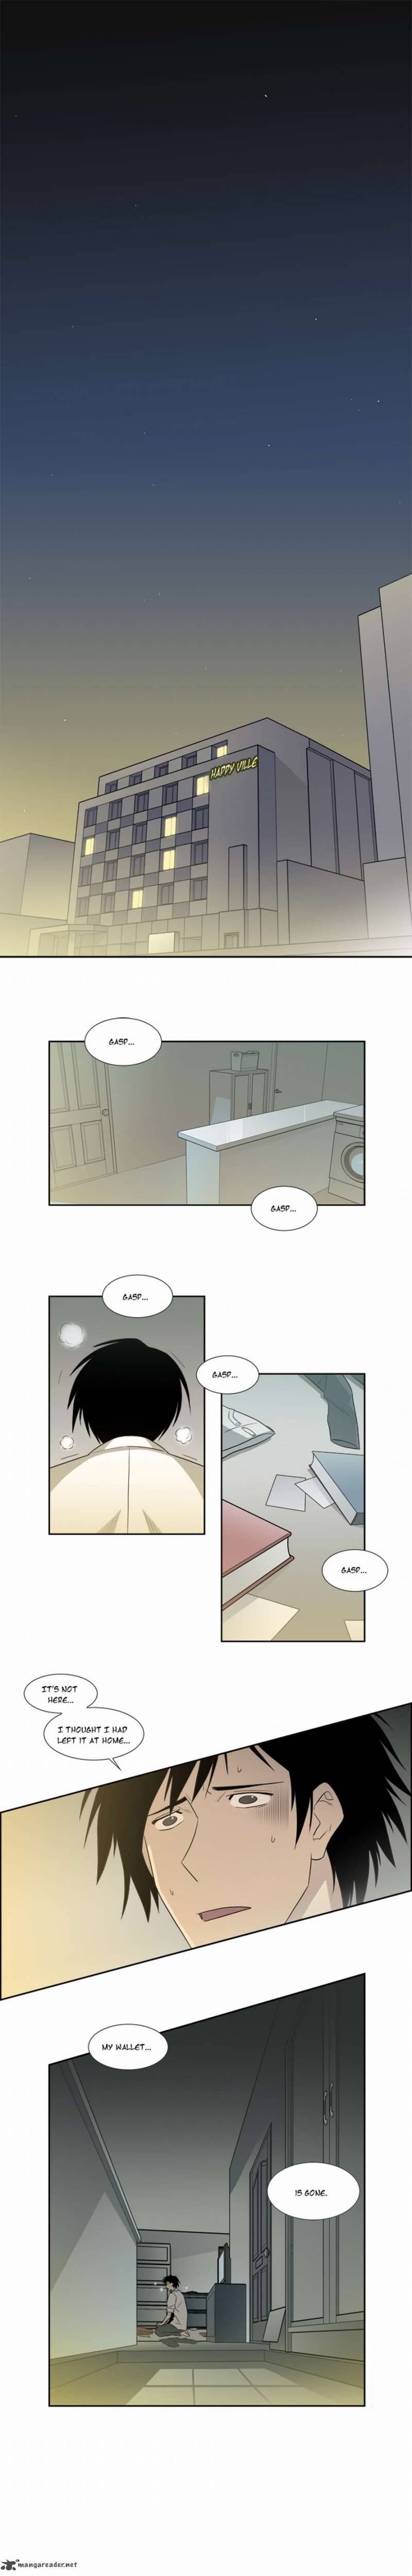 Melo Holic Chapter 18 Page 1